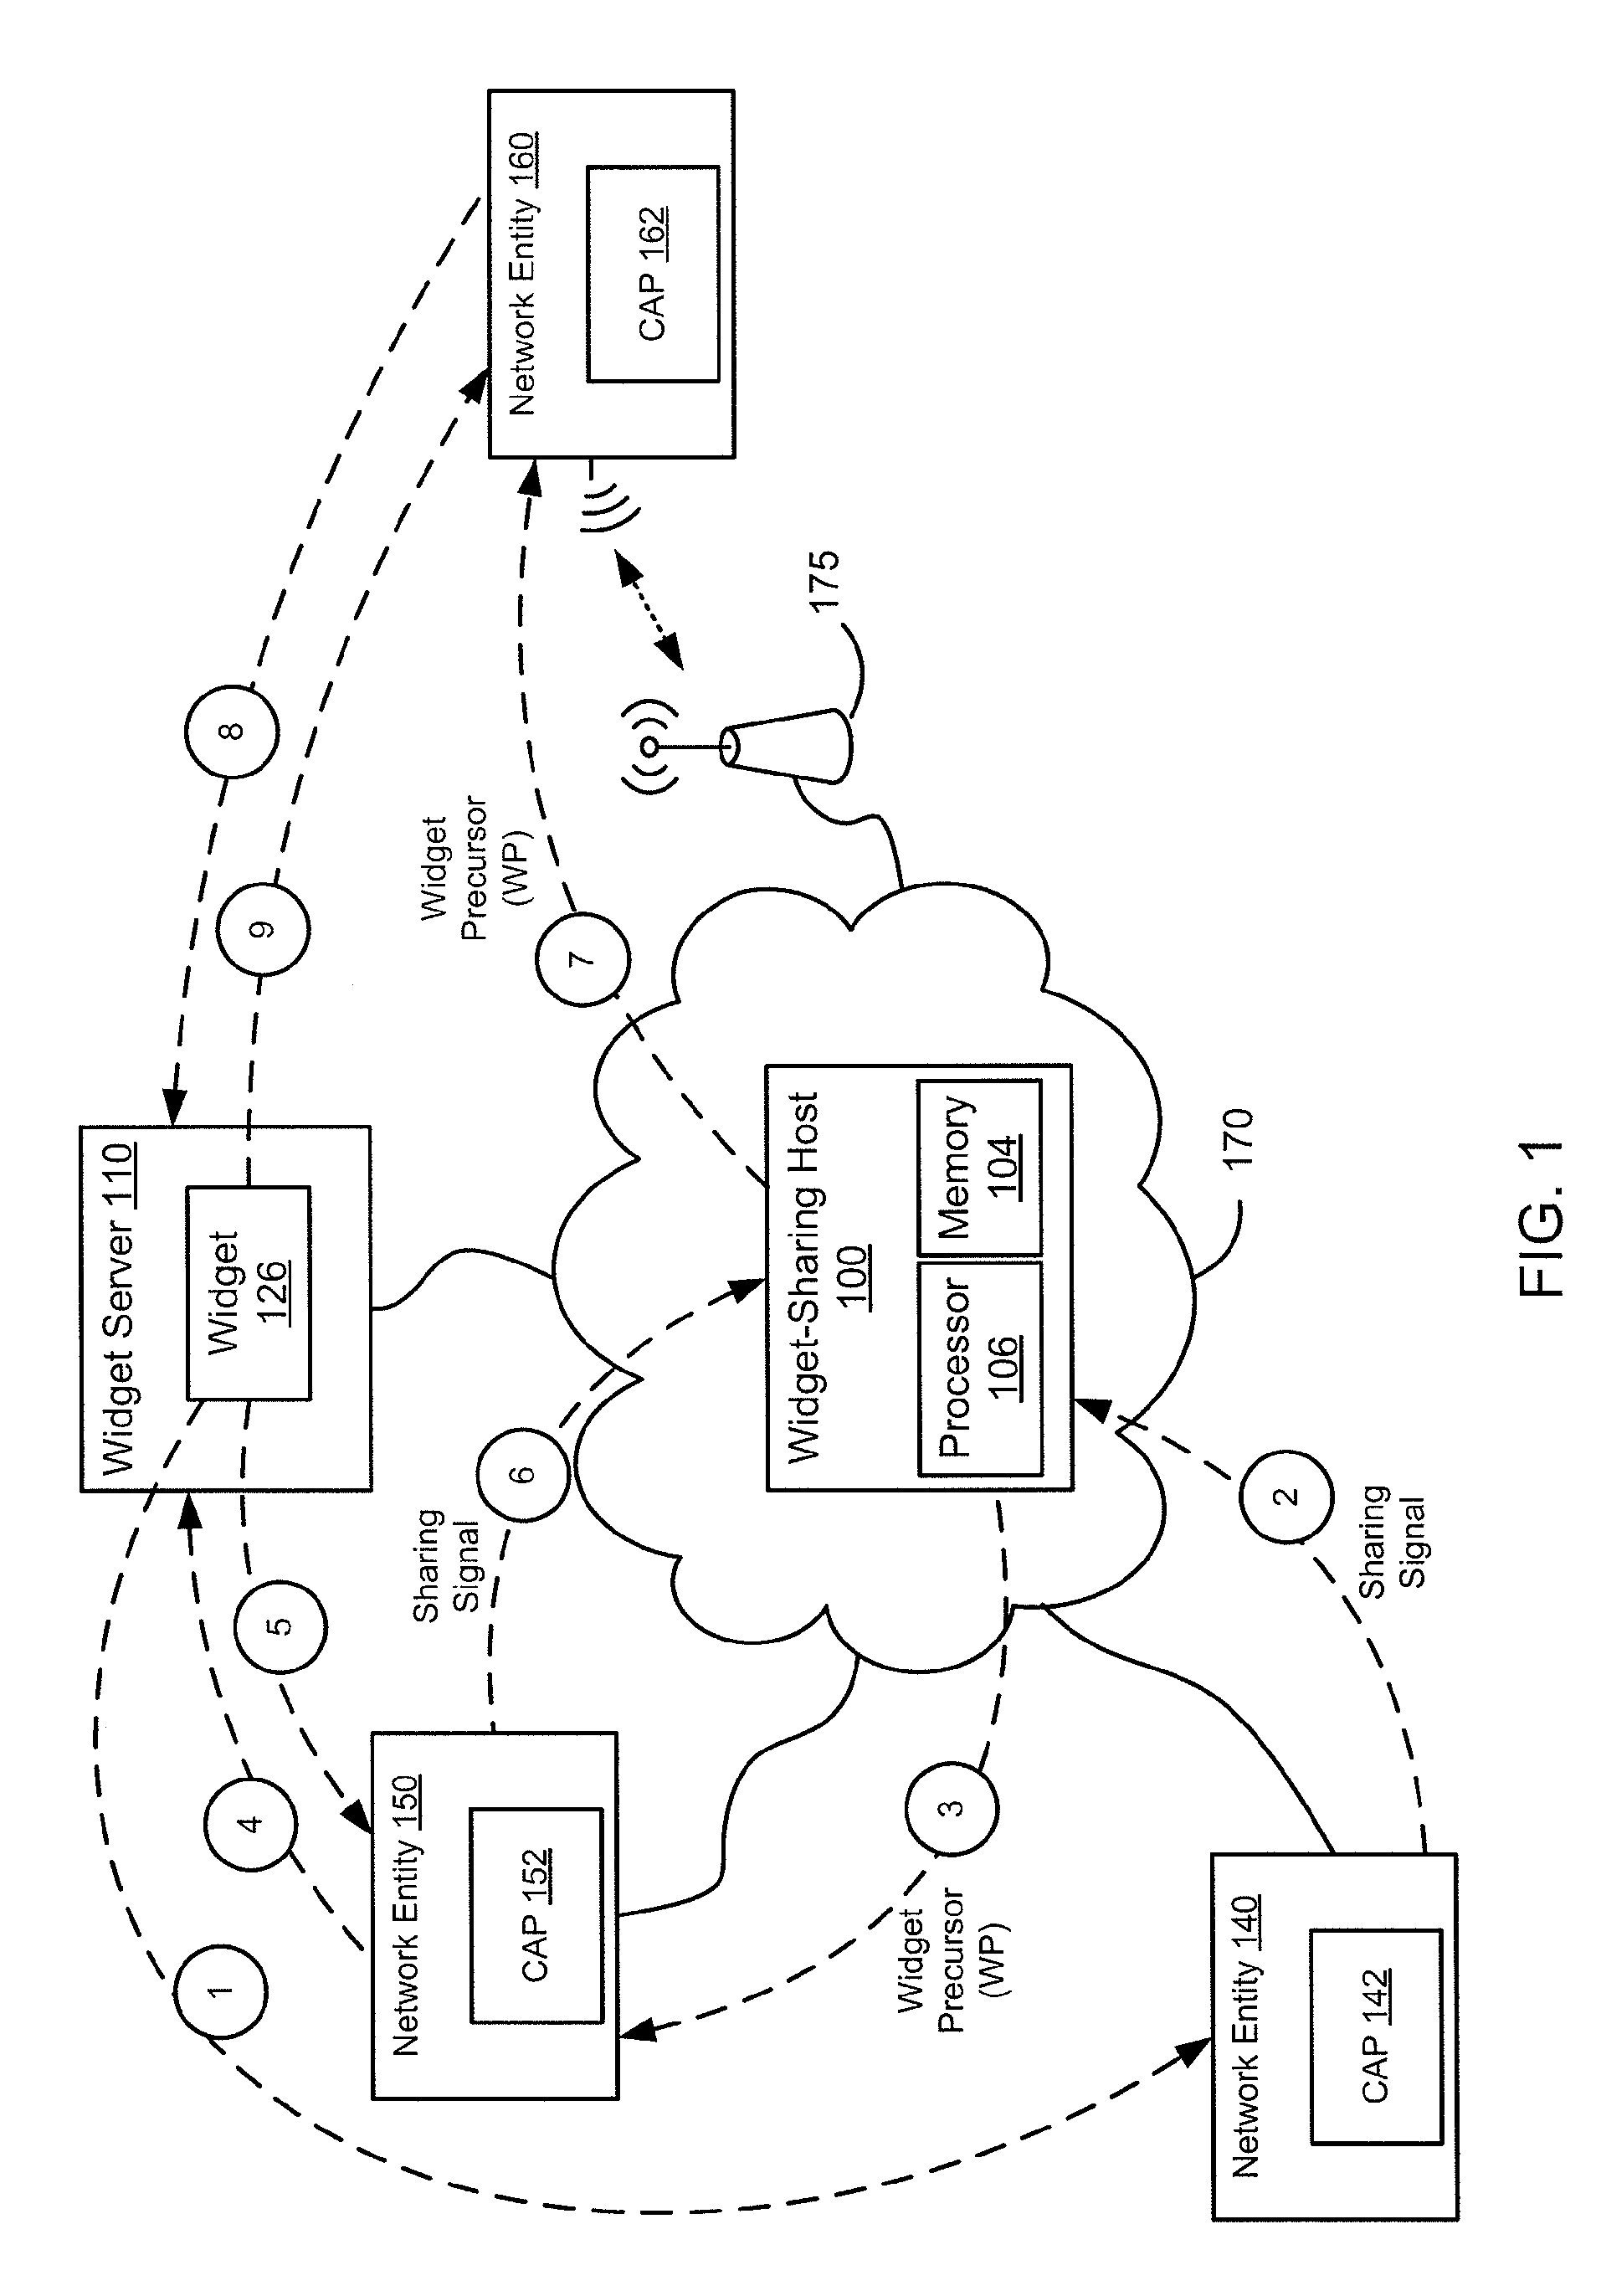 Methods and apparatus for widget sharing between content aggregation points